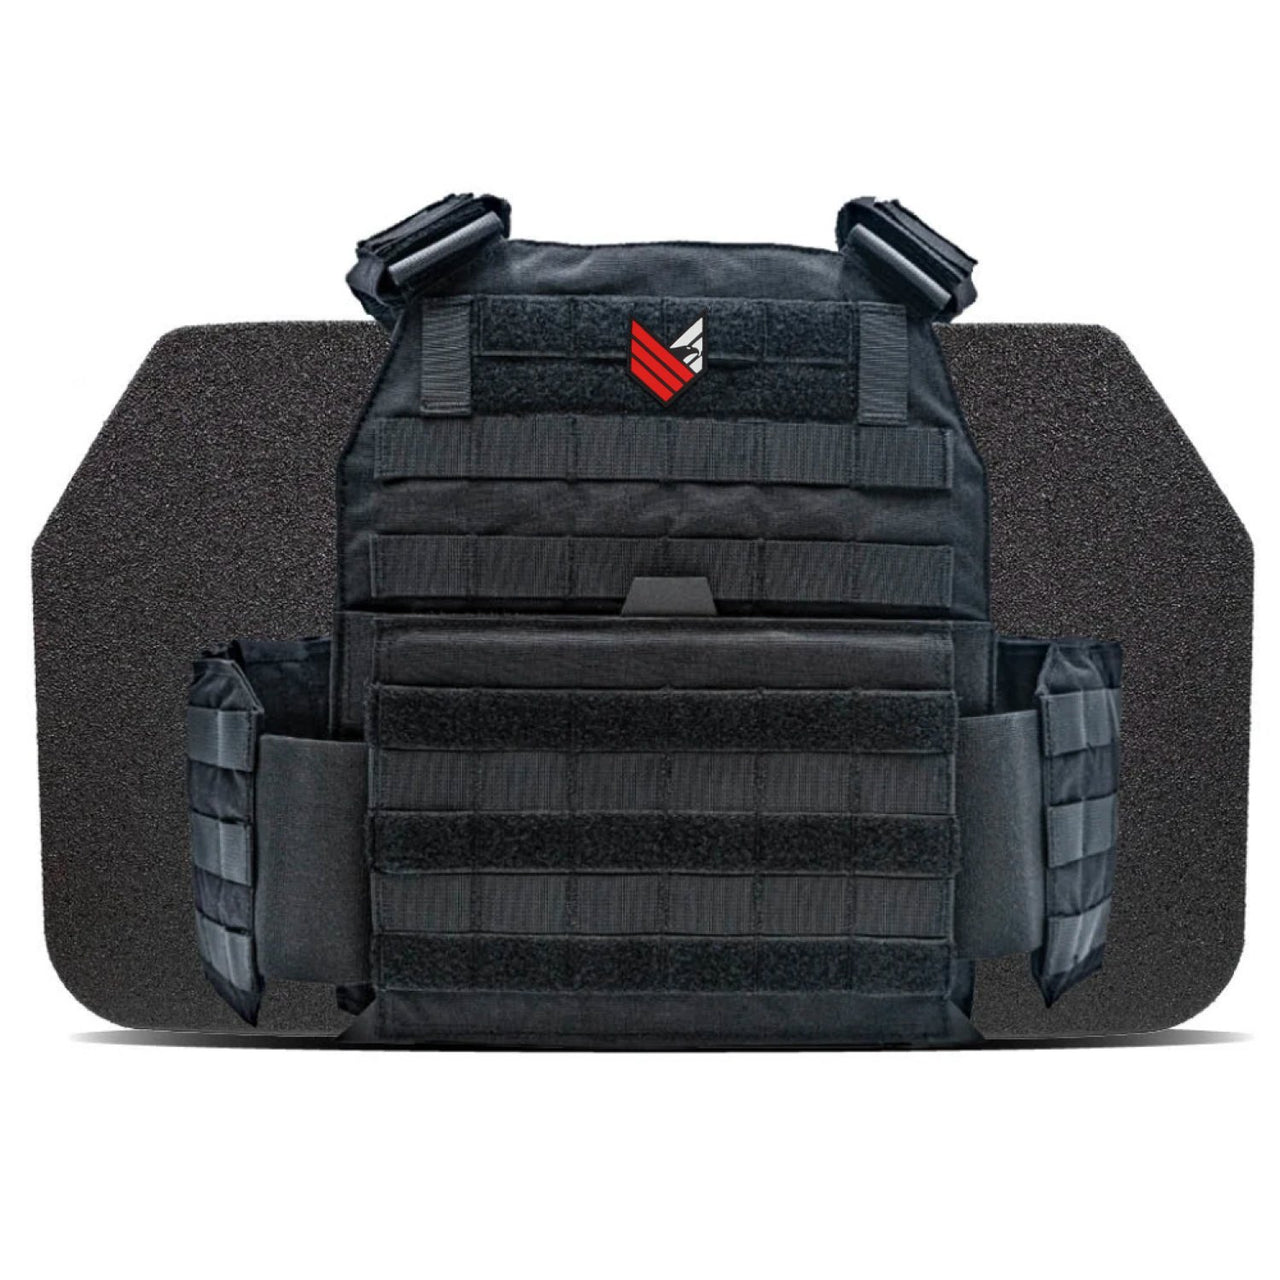 A Body Armor Direct Advanced Body Armor Plate Carrier with Cummerbund on a white background.